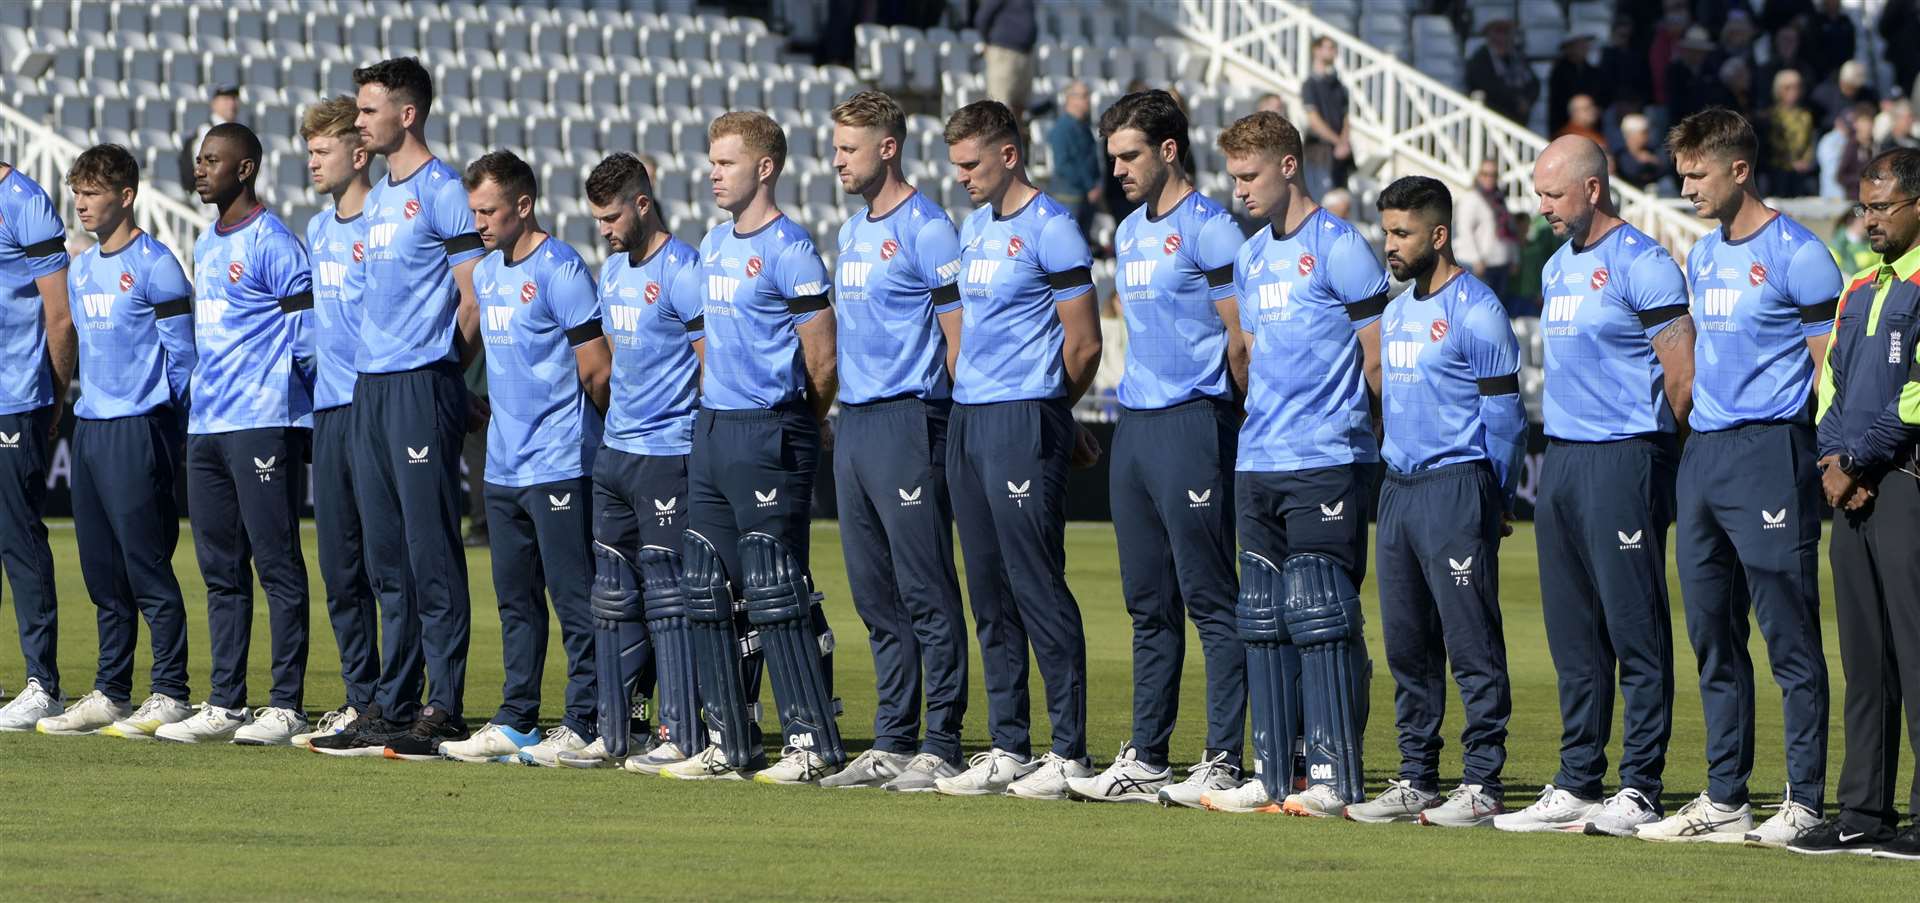 A minute's silence before the start of play in memory of The Queen. Picture: Barry Goodwin